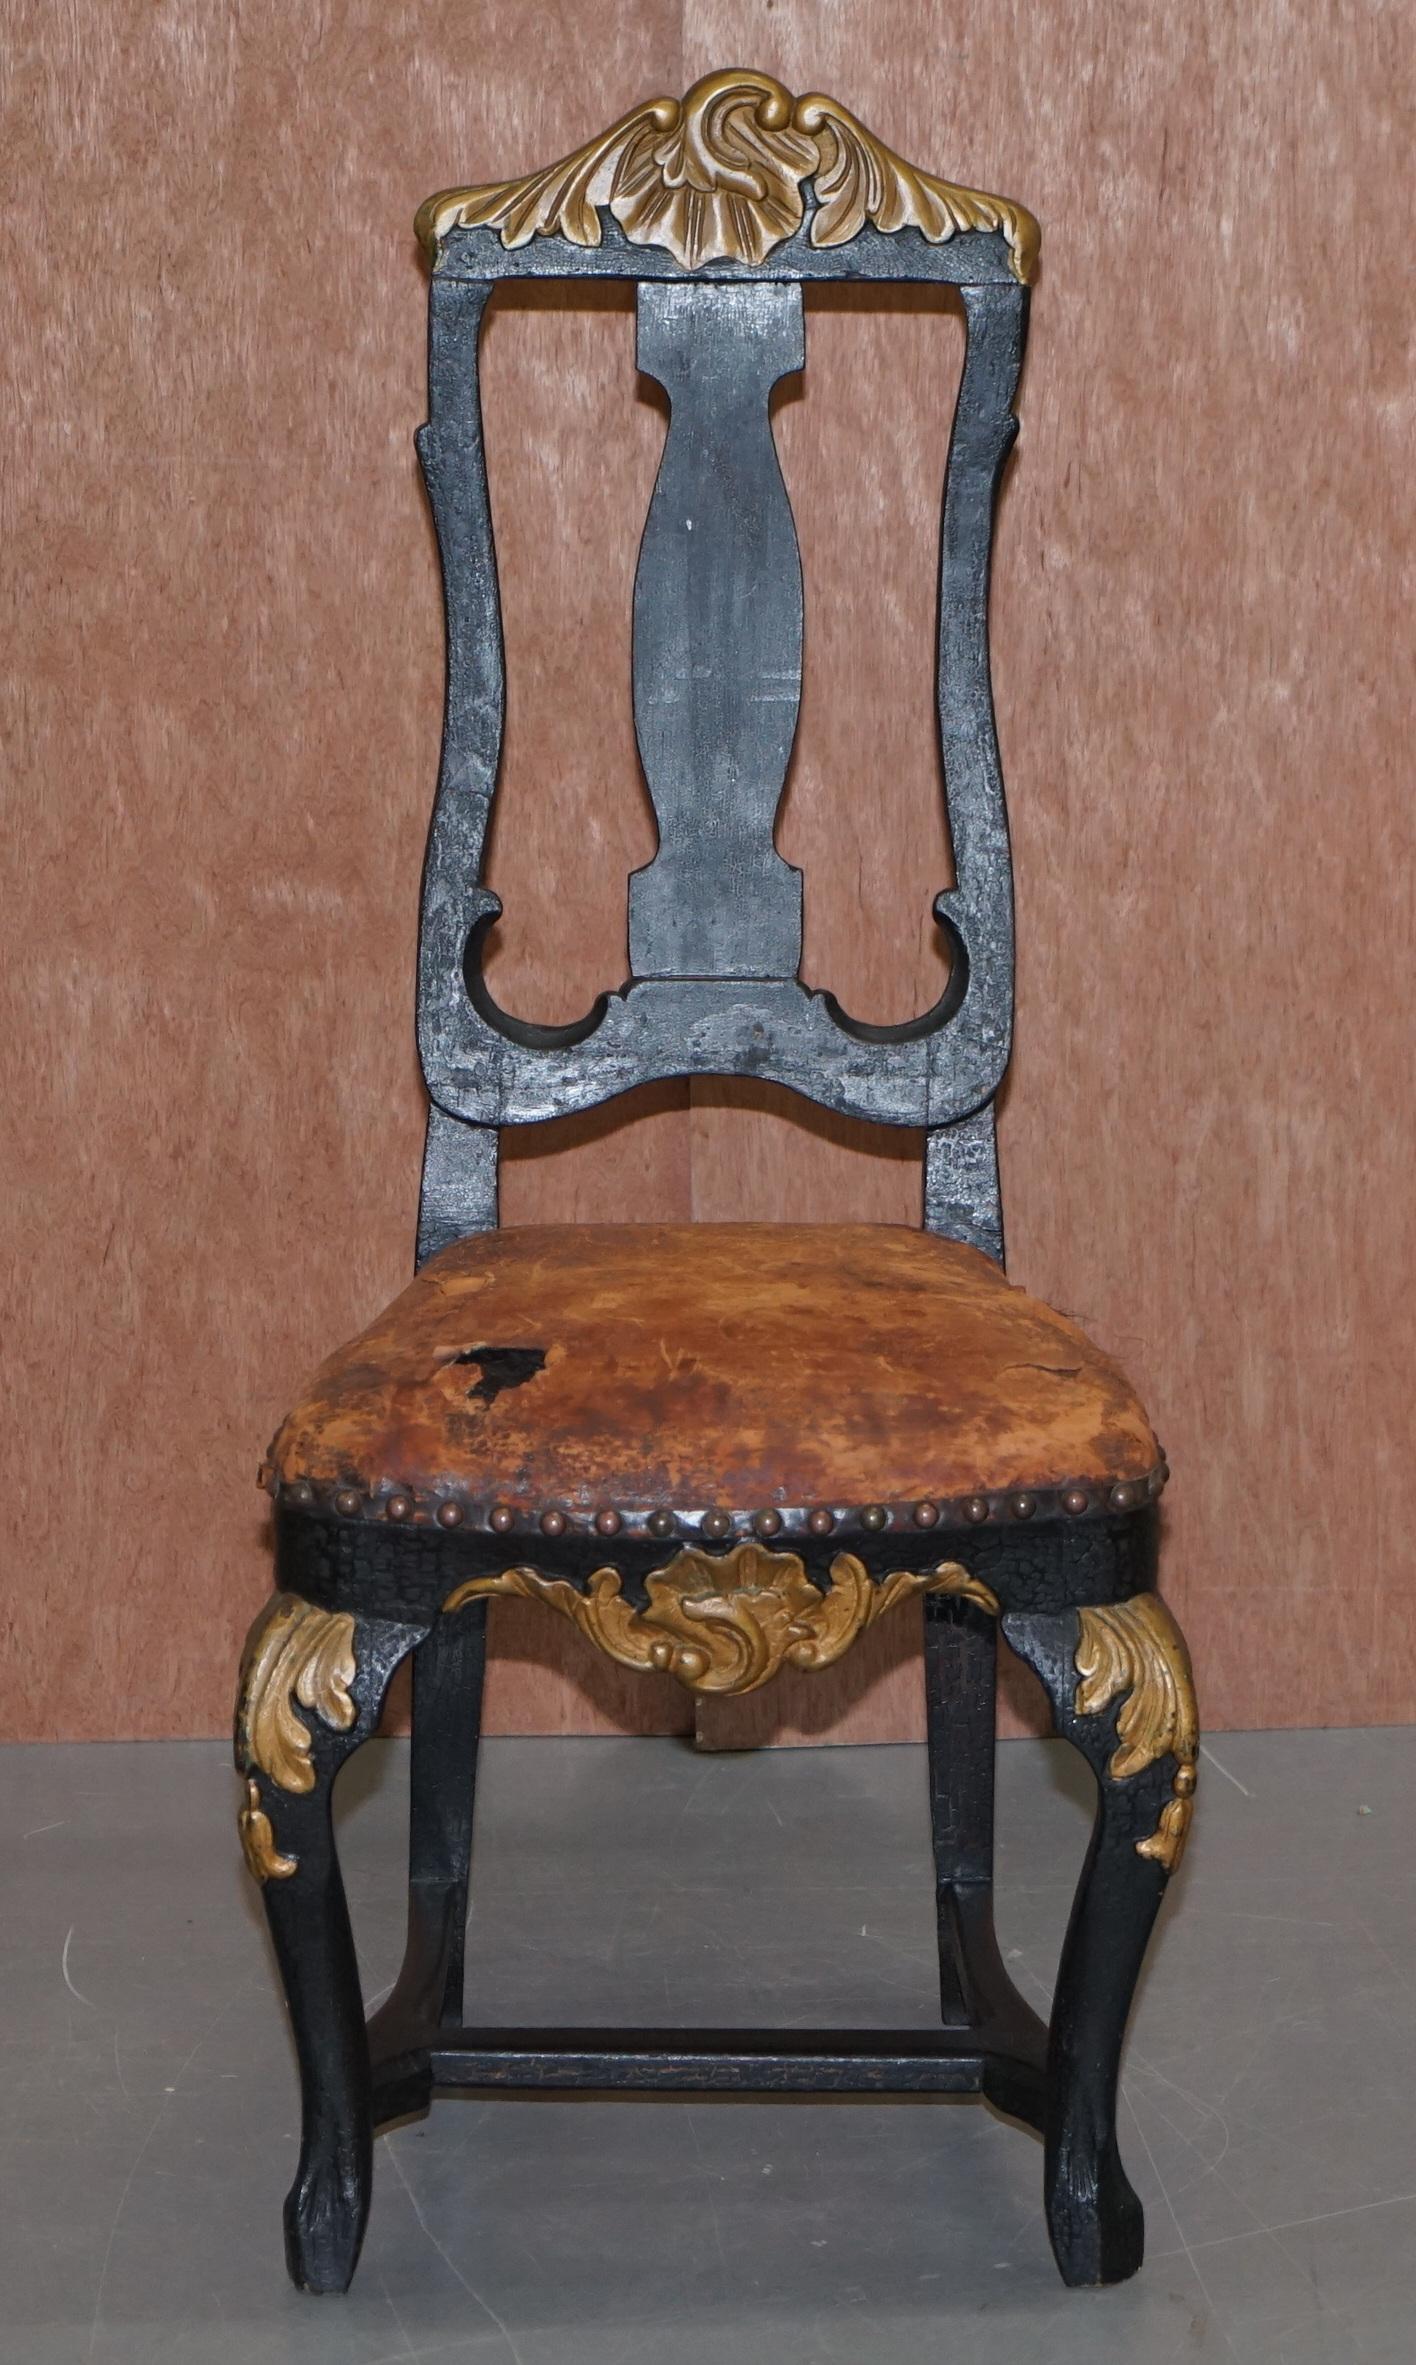 We are delighted to offer for sale this very old and original Spanish high back carved occasional chair

An ornately carved and decorated original chair. The leather upholstery is period, heavily distressed with horse hair padding. The frame is